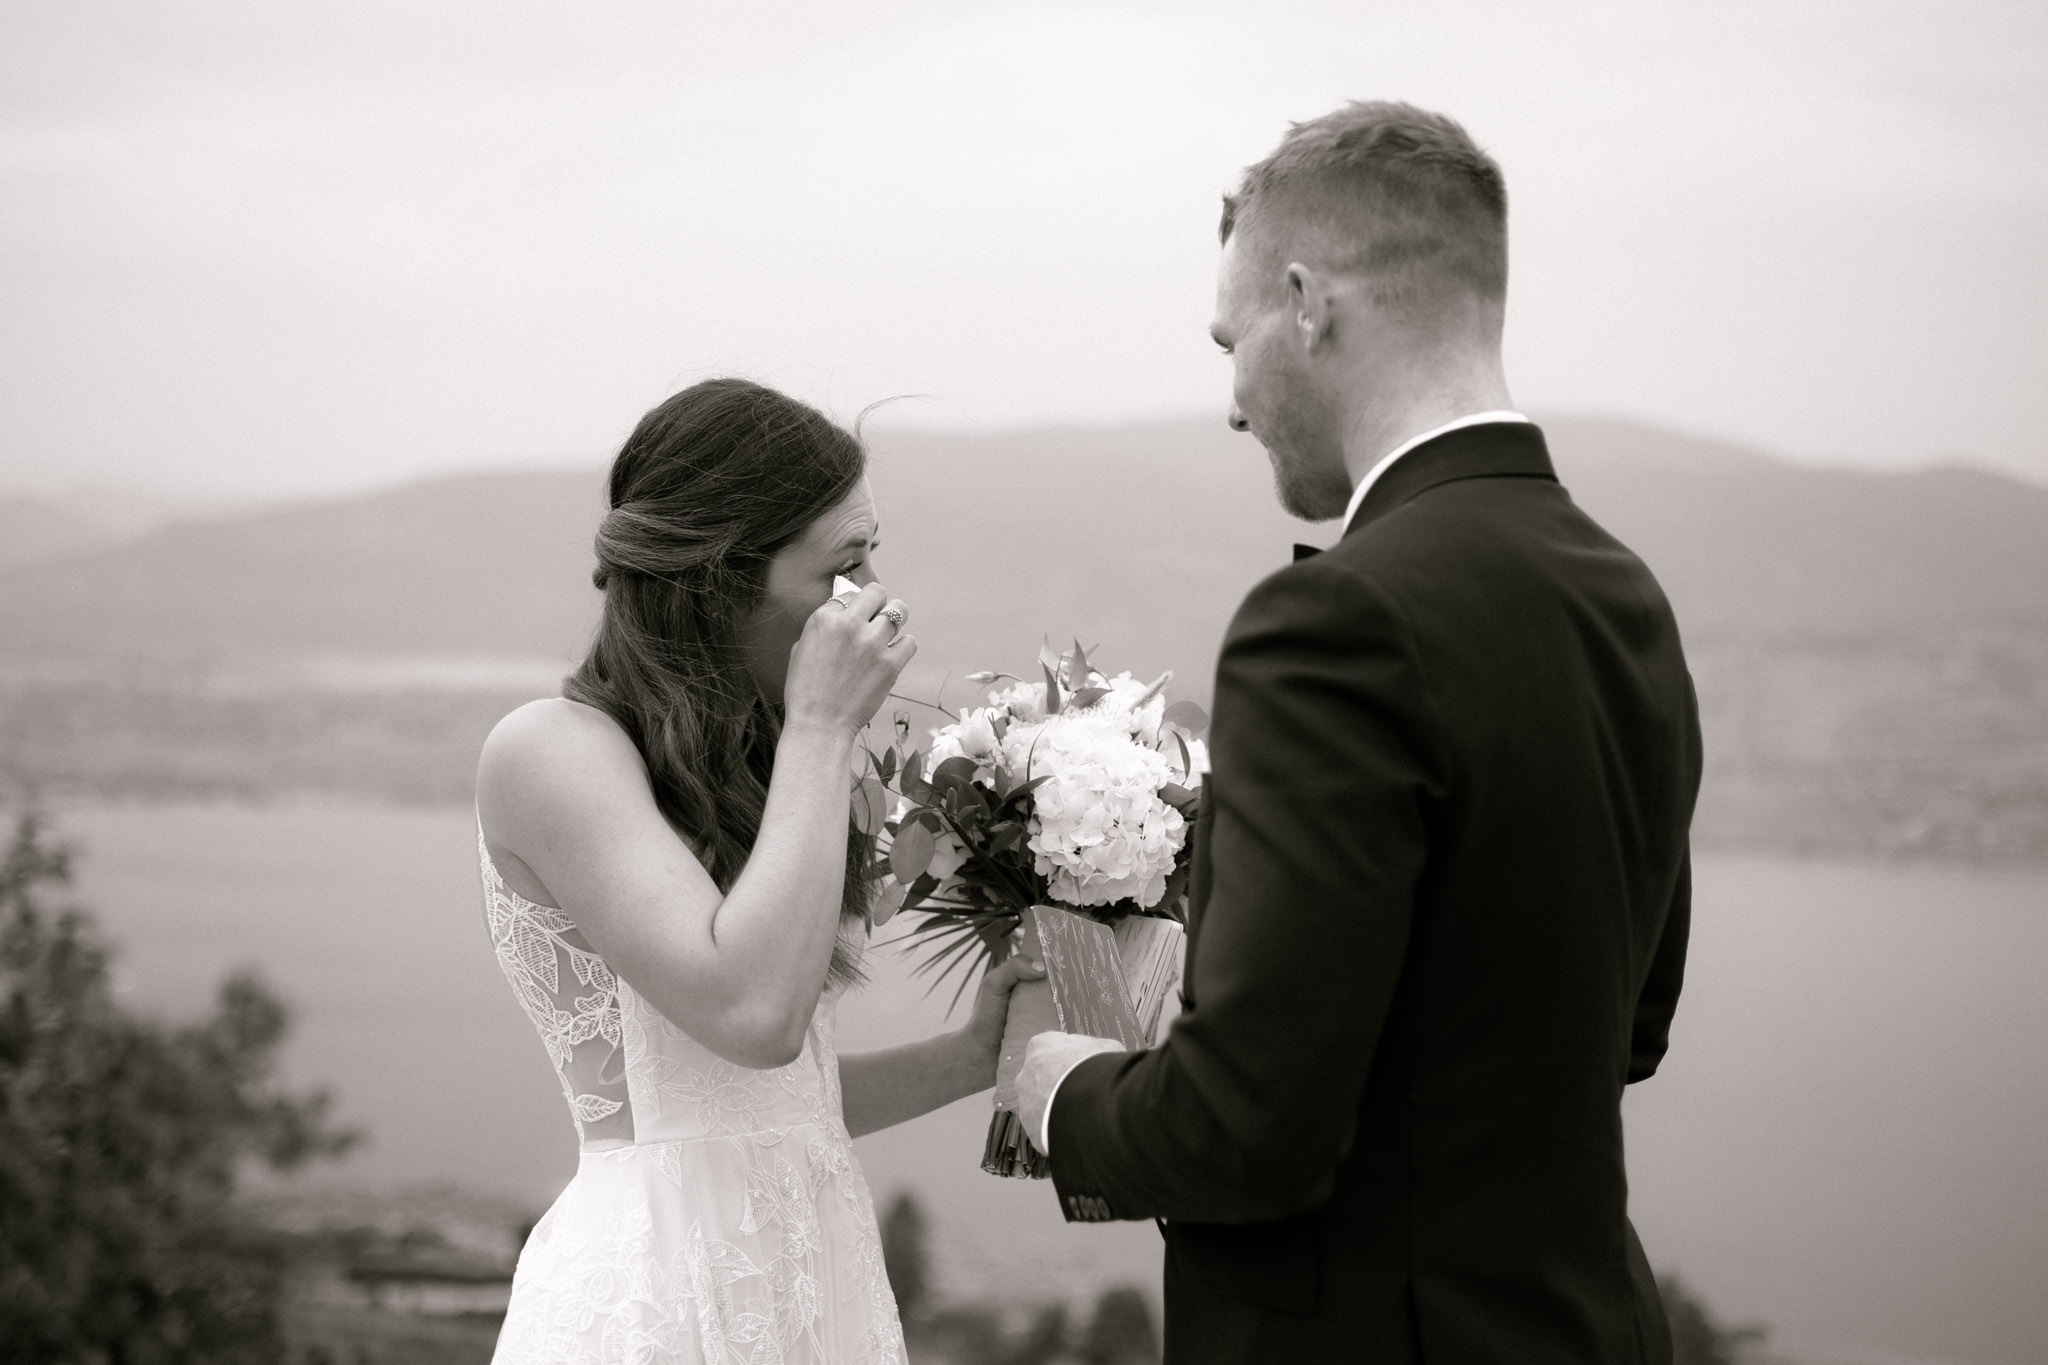 emotional private vows at munson mountain in penticton bc